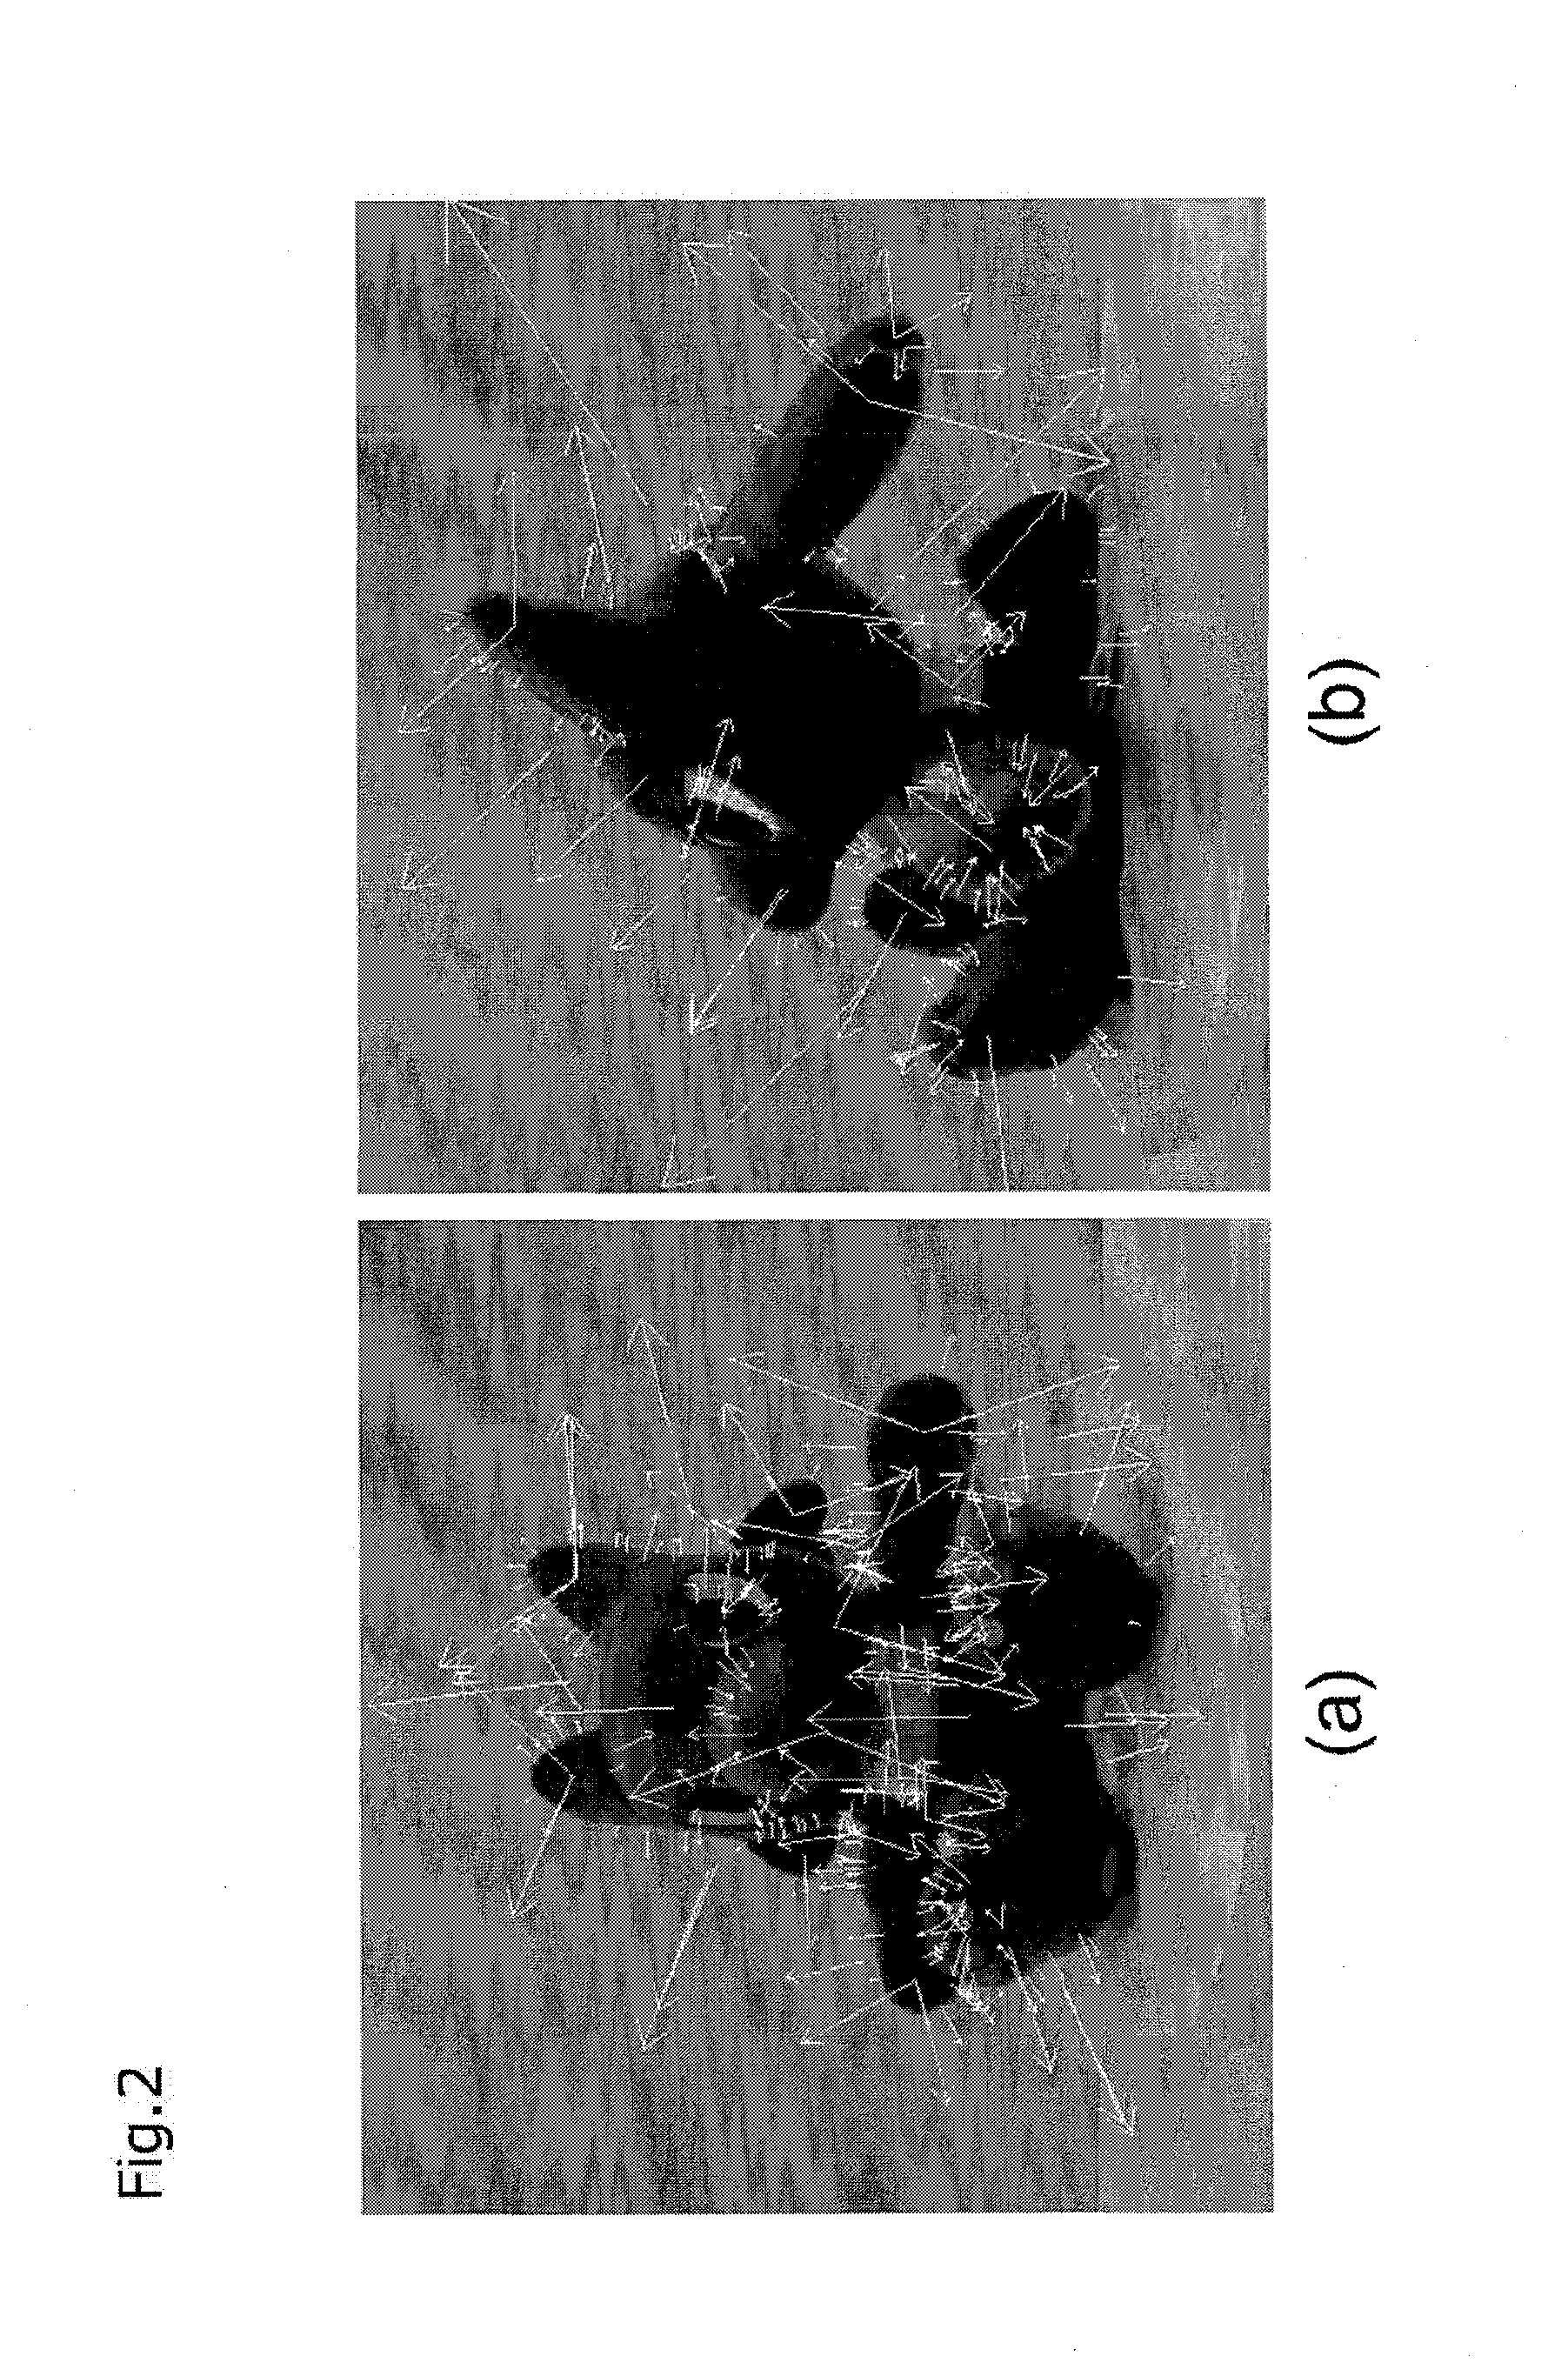 Method and apparatus of compiling image database for three-dimensional object recognition